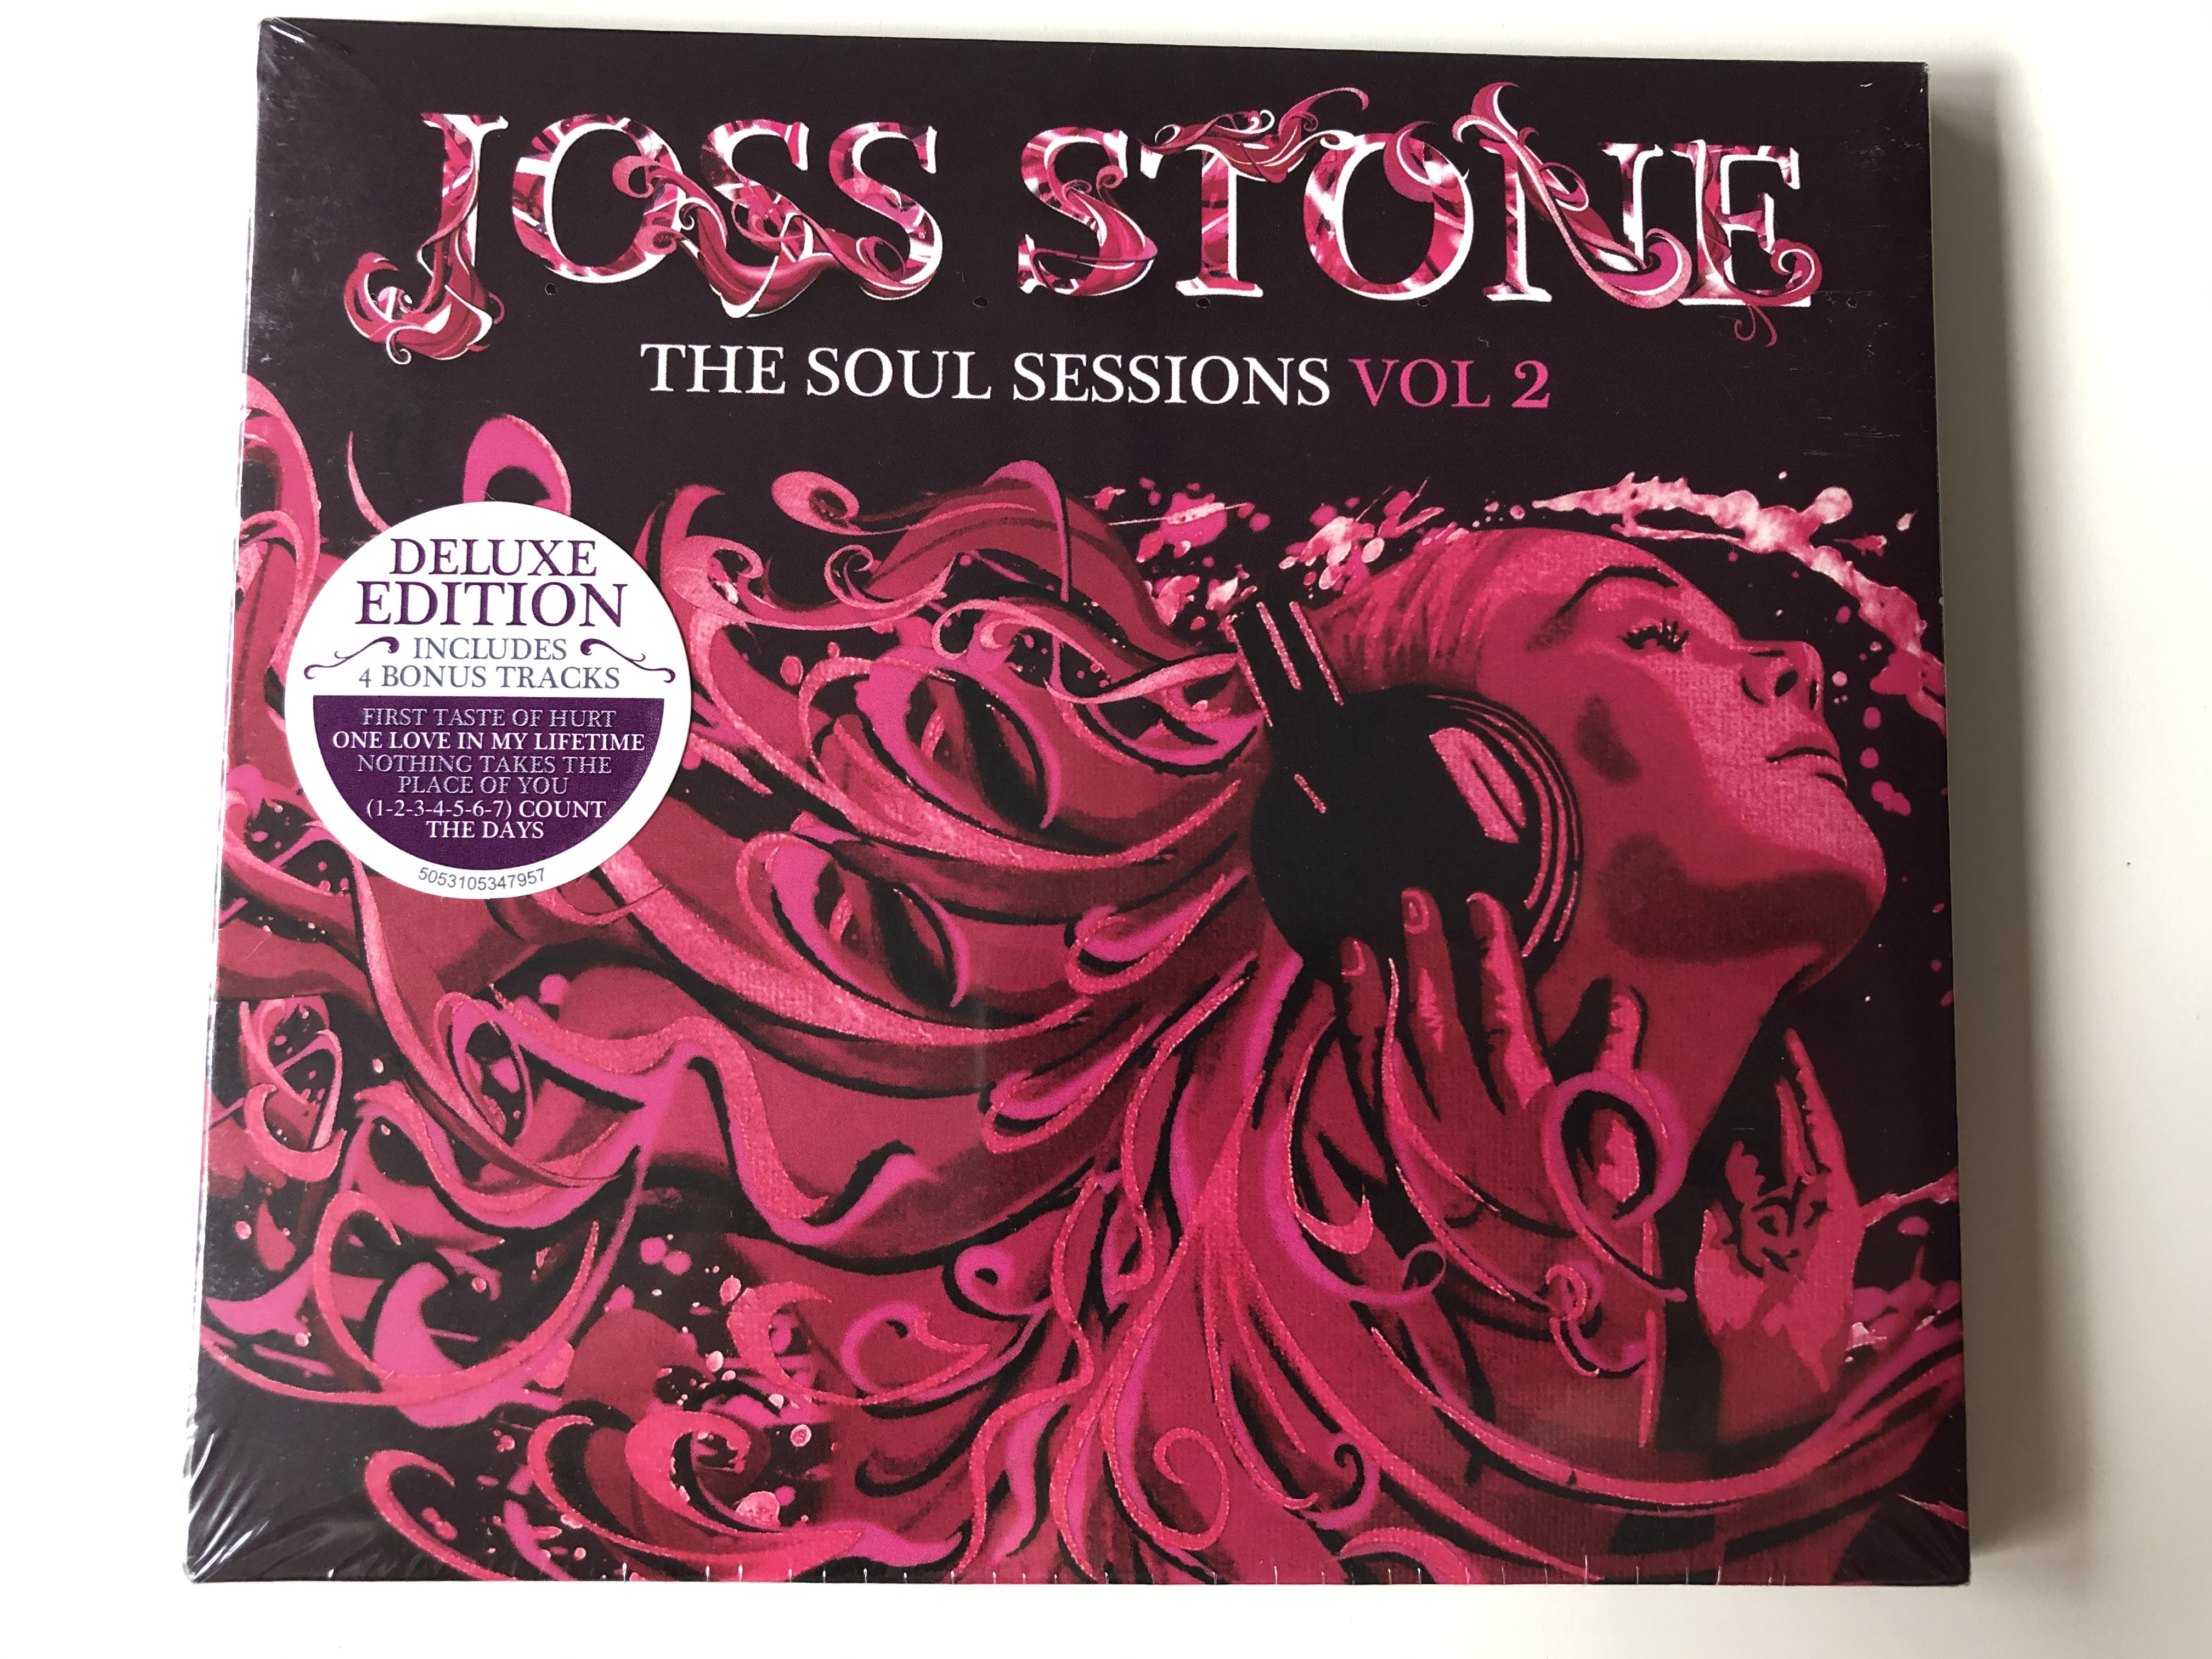 joss-stone-the-soul-sessions-vol-2-deluxe-edition-s-curve-records-audio-cd-2012-5053105347957-1-.jpg